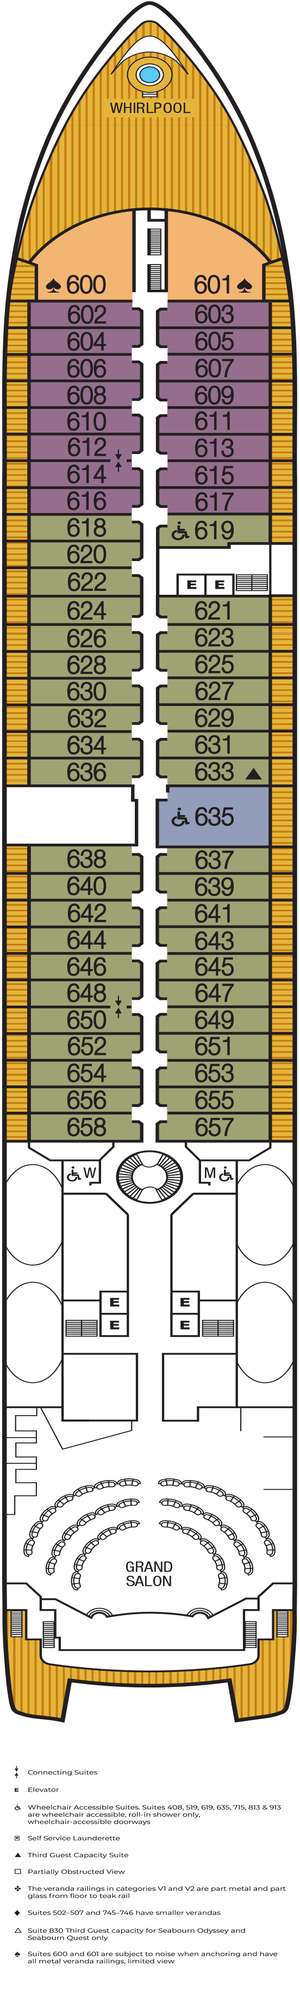 Deck plan for Seabourn Quest